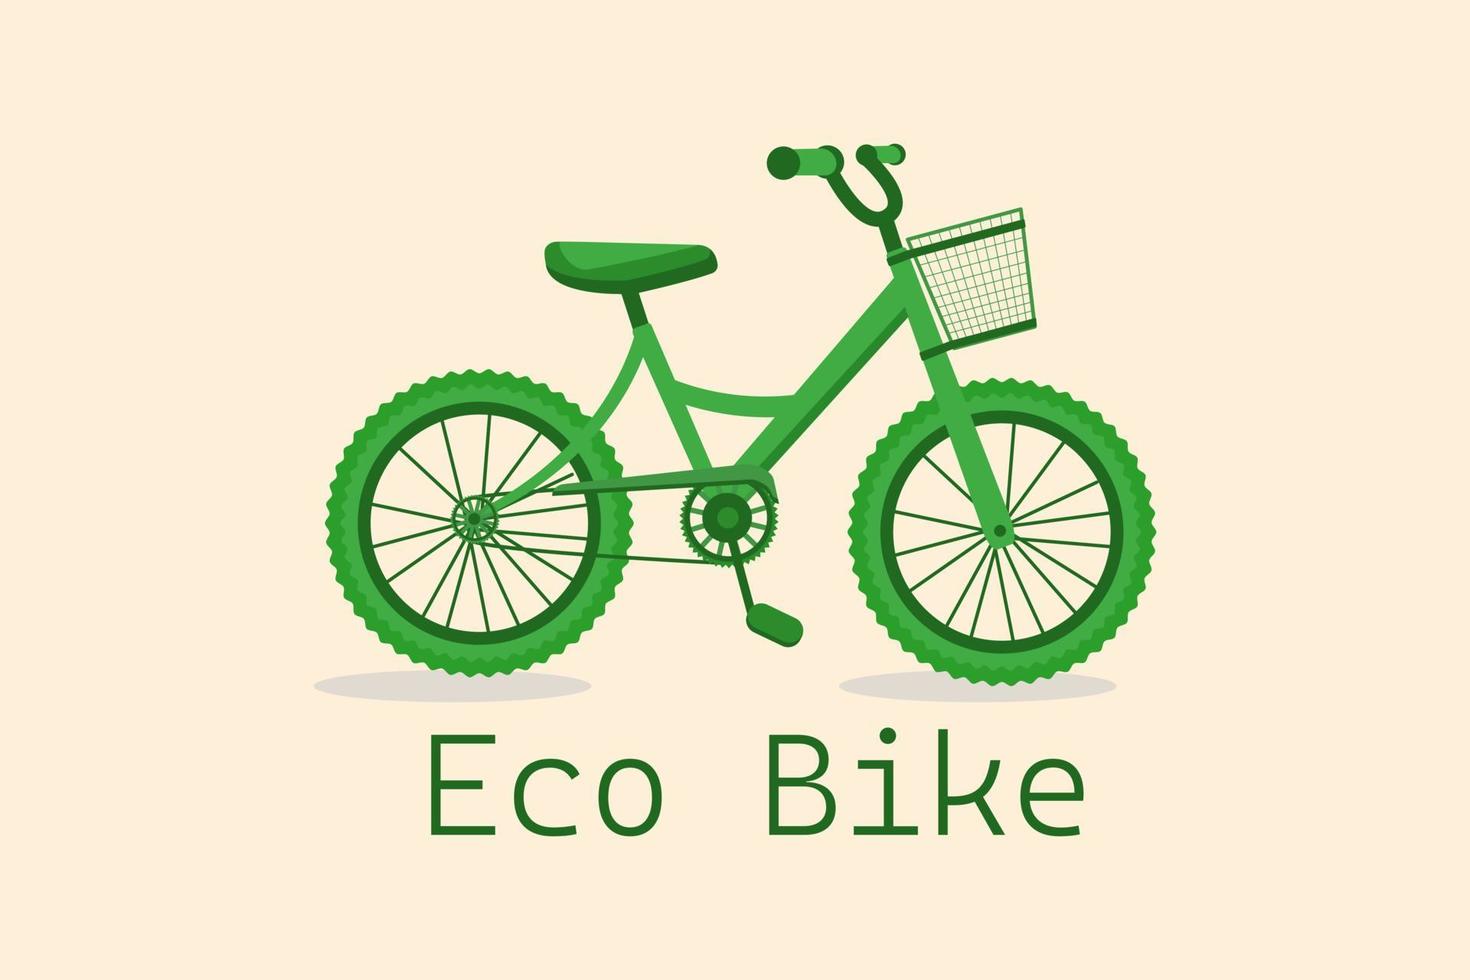 Go bike for green travel. Eco technology symbol. Cute bike for people and protection the environment. Isolated illustration on color background. Vector illustration.